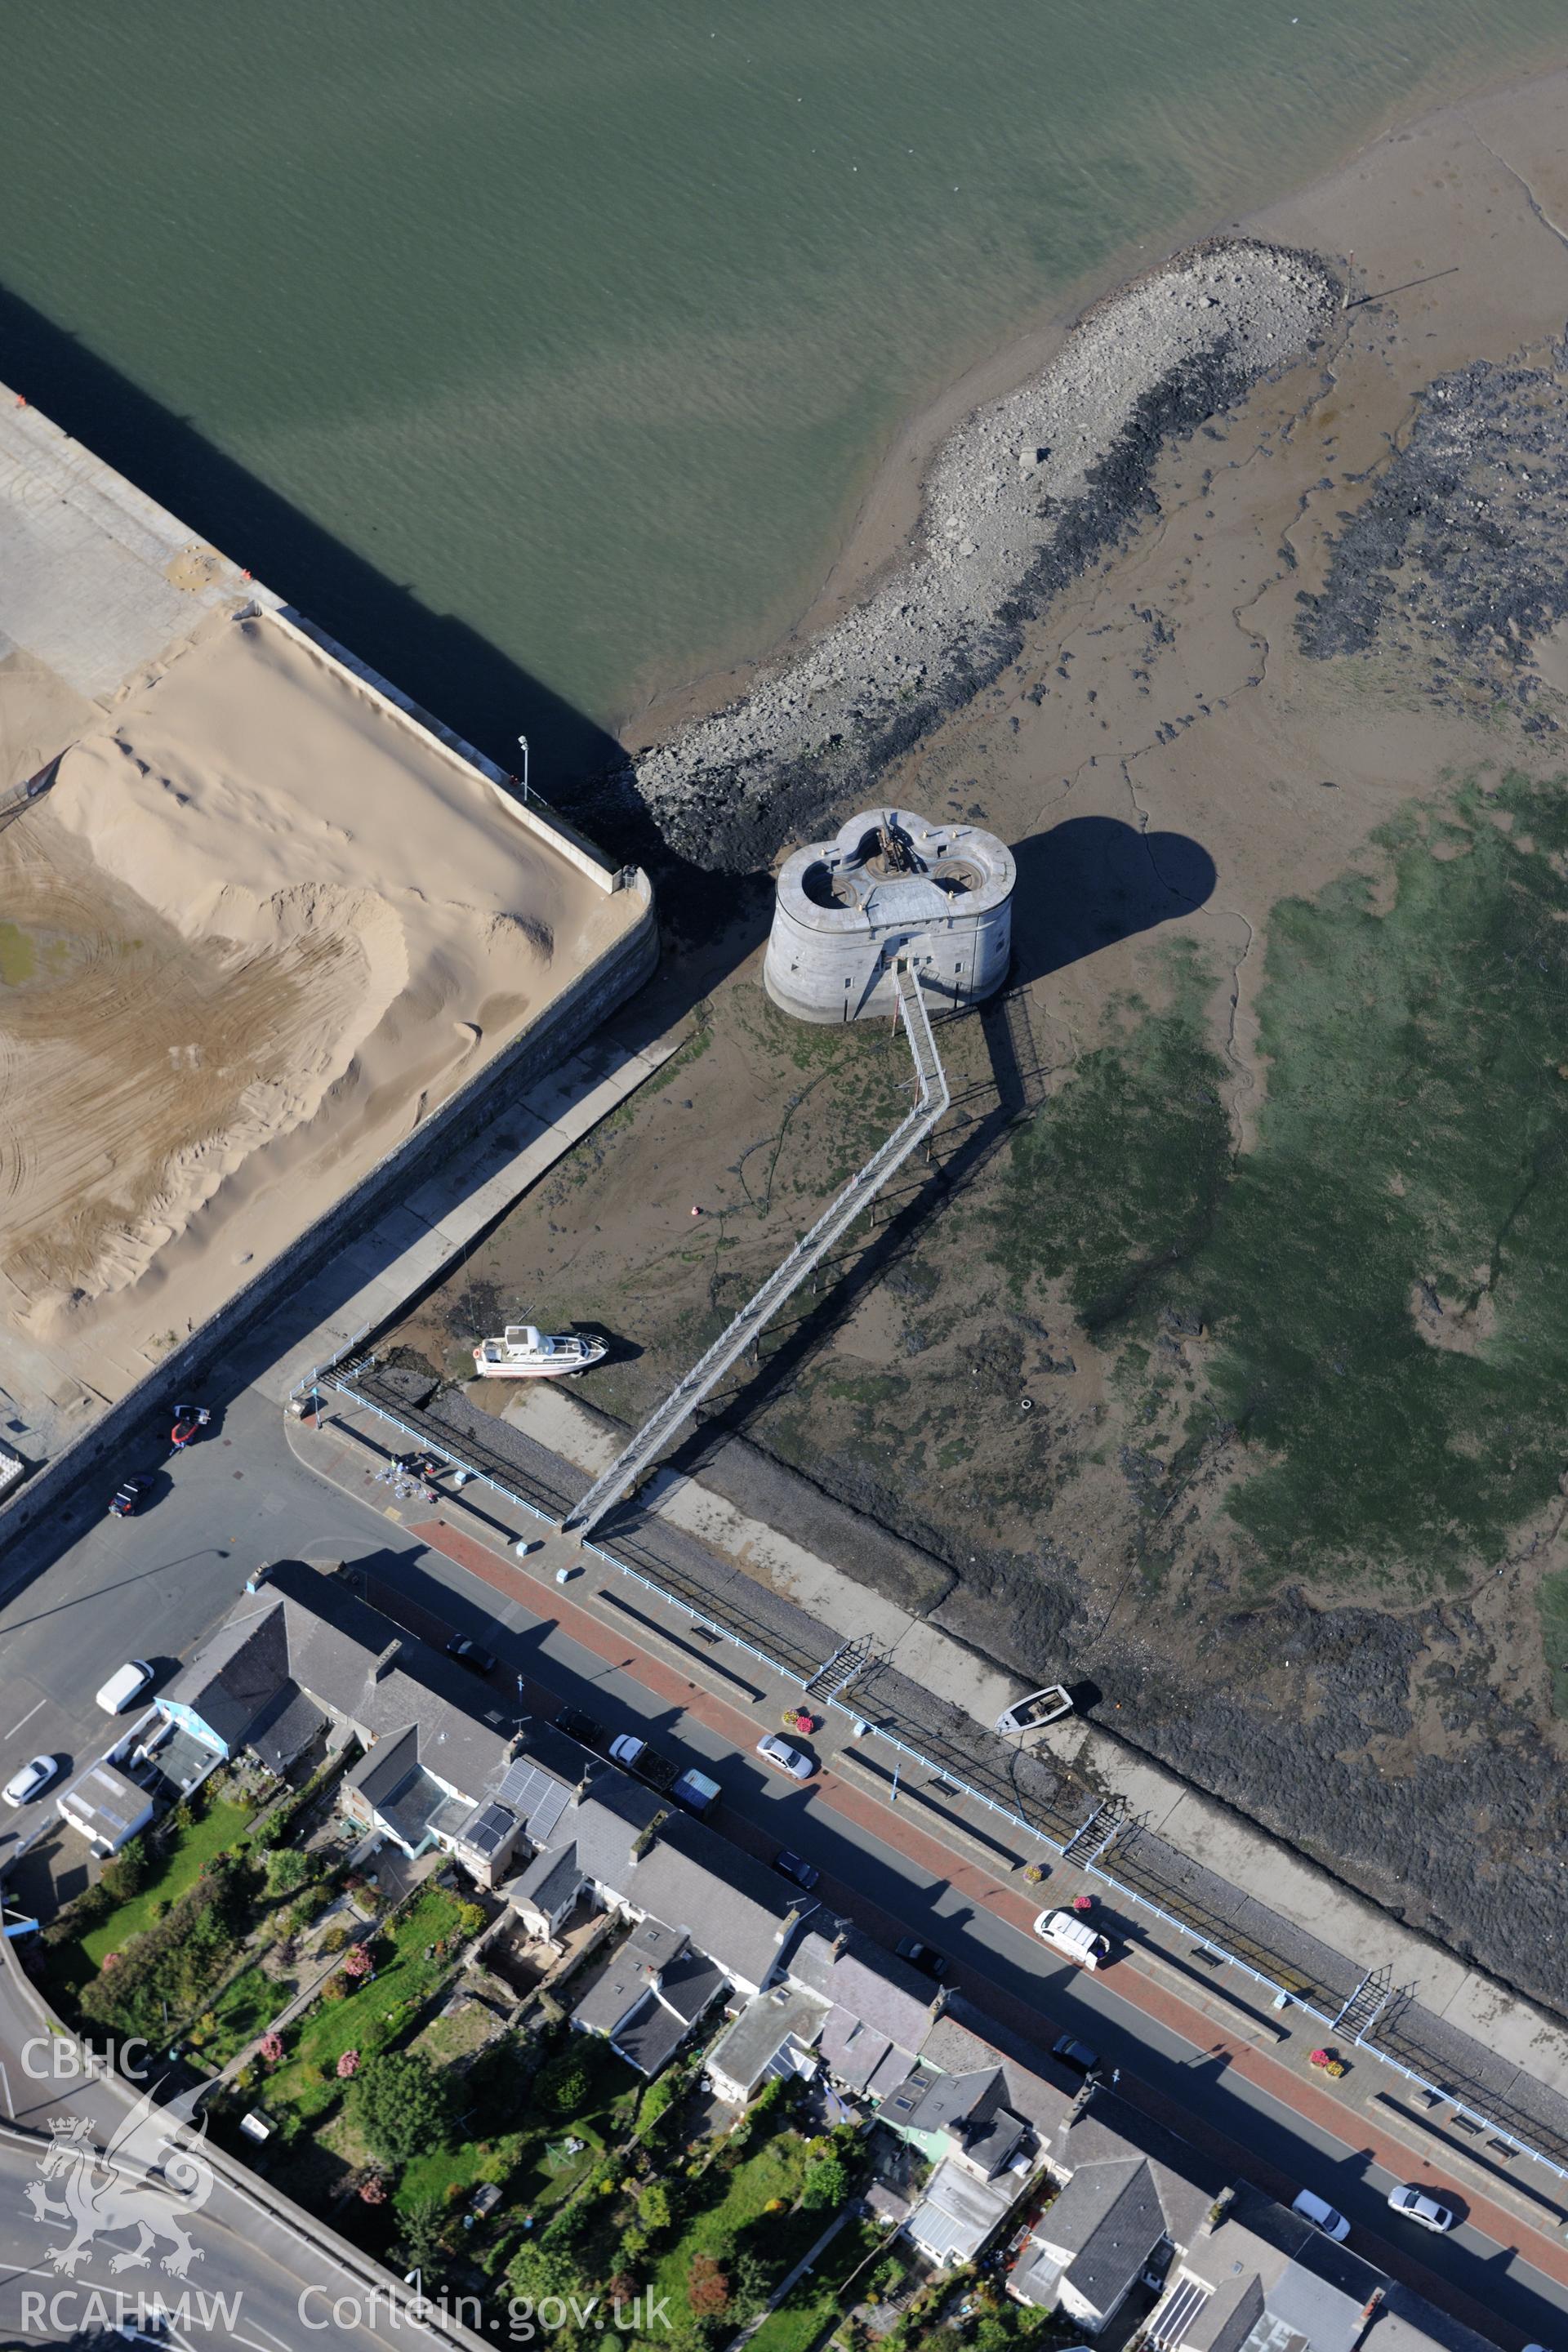 The west martello tower at Pembroke Dockyard. Oblique aerial photograph taken during the Royal Commission's programme of archaeological aerial reconnaissance by Toby Driver on 30th September 2015.